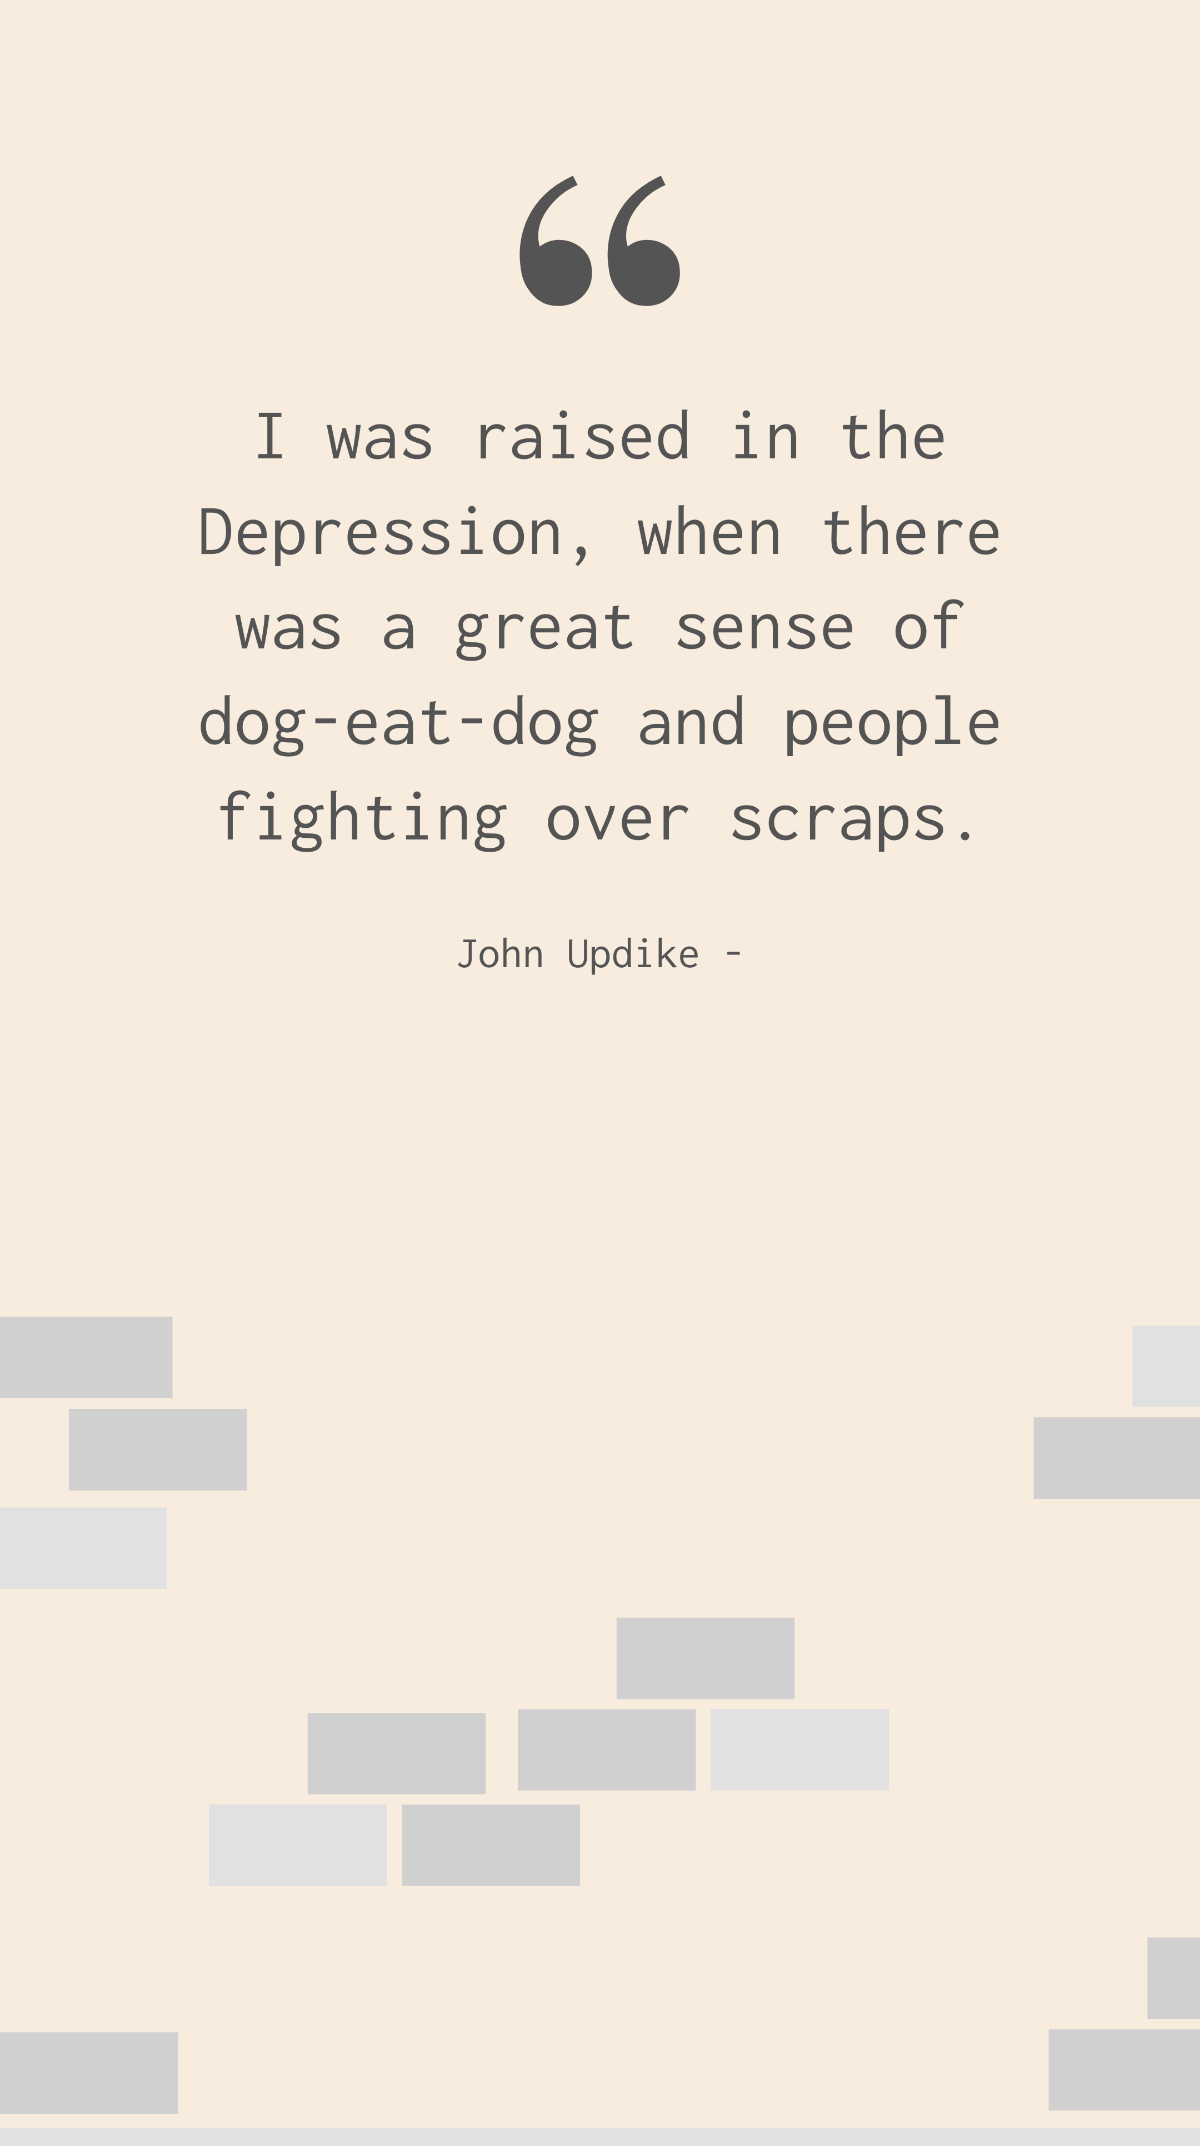 John Updike - I was raised in the Depression, when there was a great sense of dog-eat-dog and people fighting over scraps. Template